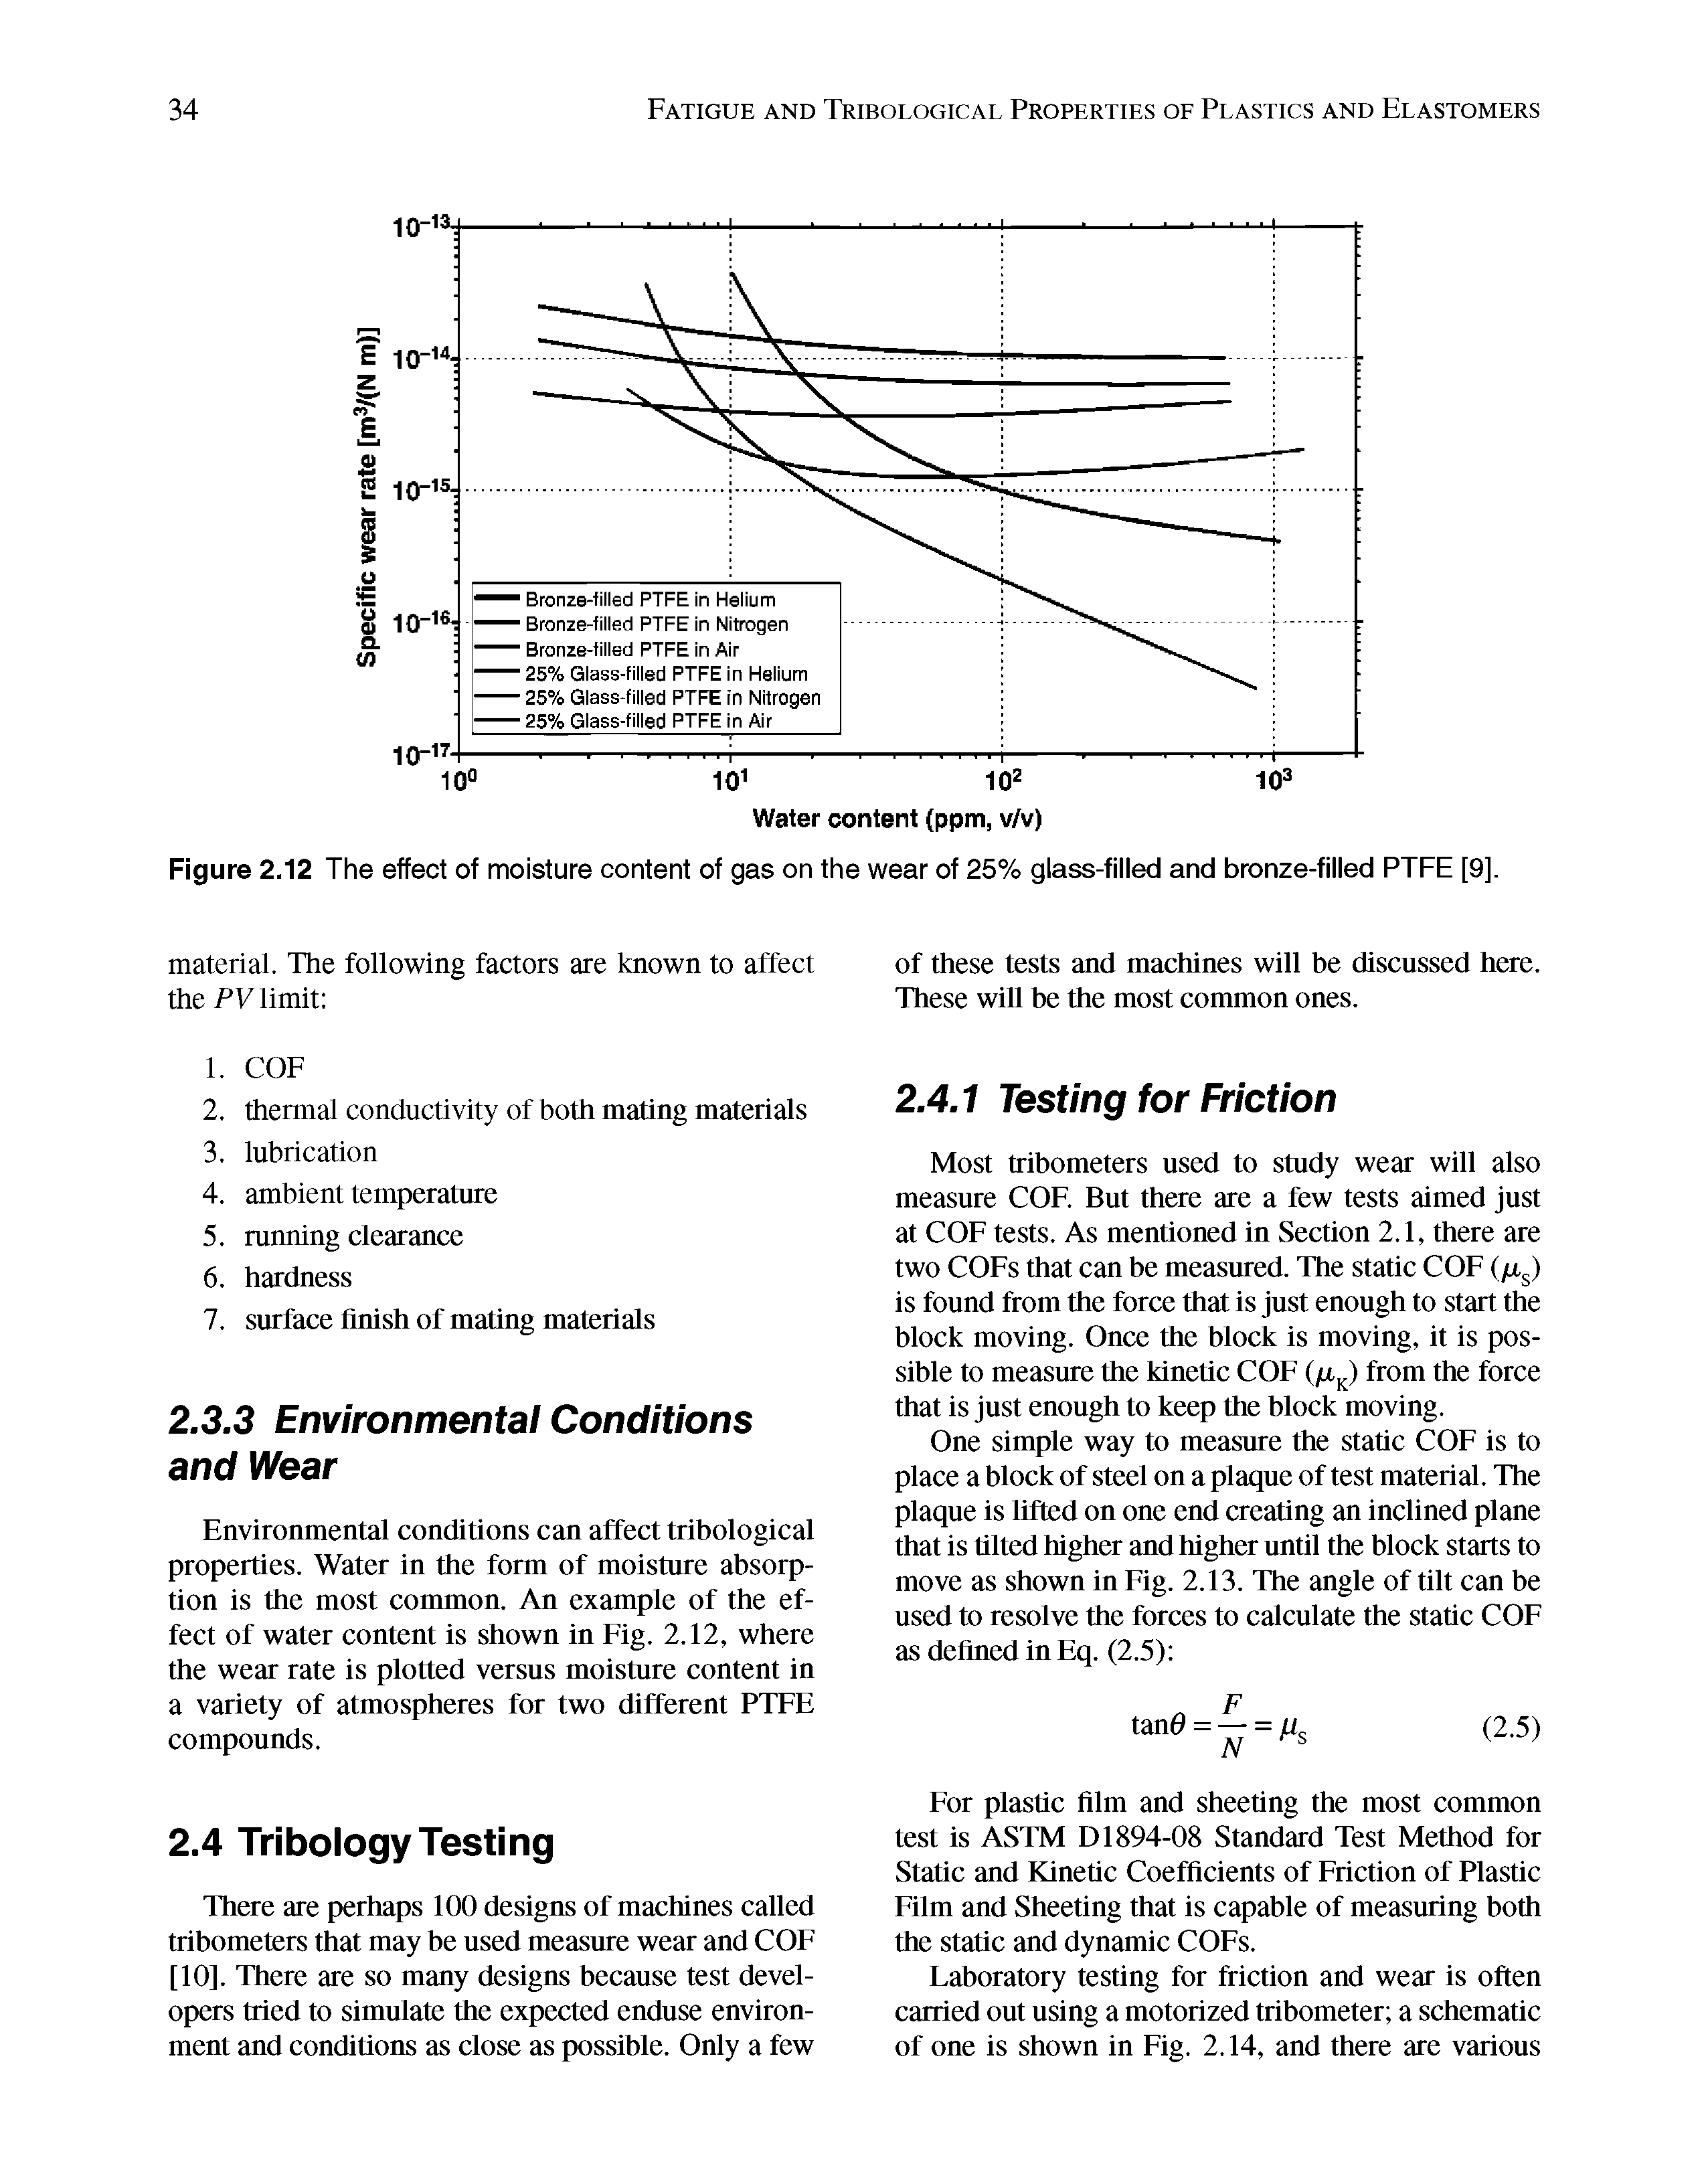 Figure 2.12 The effect of moisture content of gas on the wear of 25% glass-filled and bronze-filled PTFE [9].